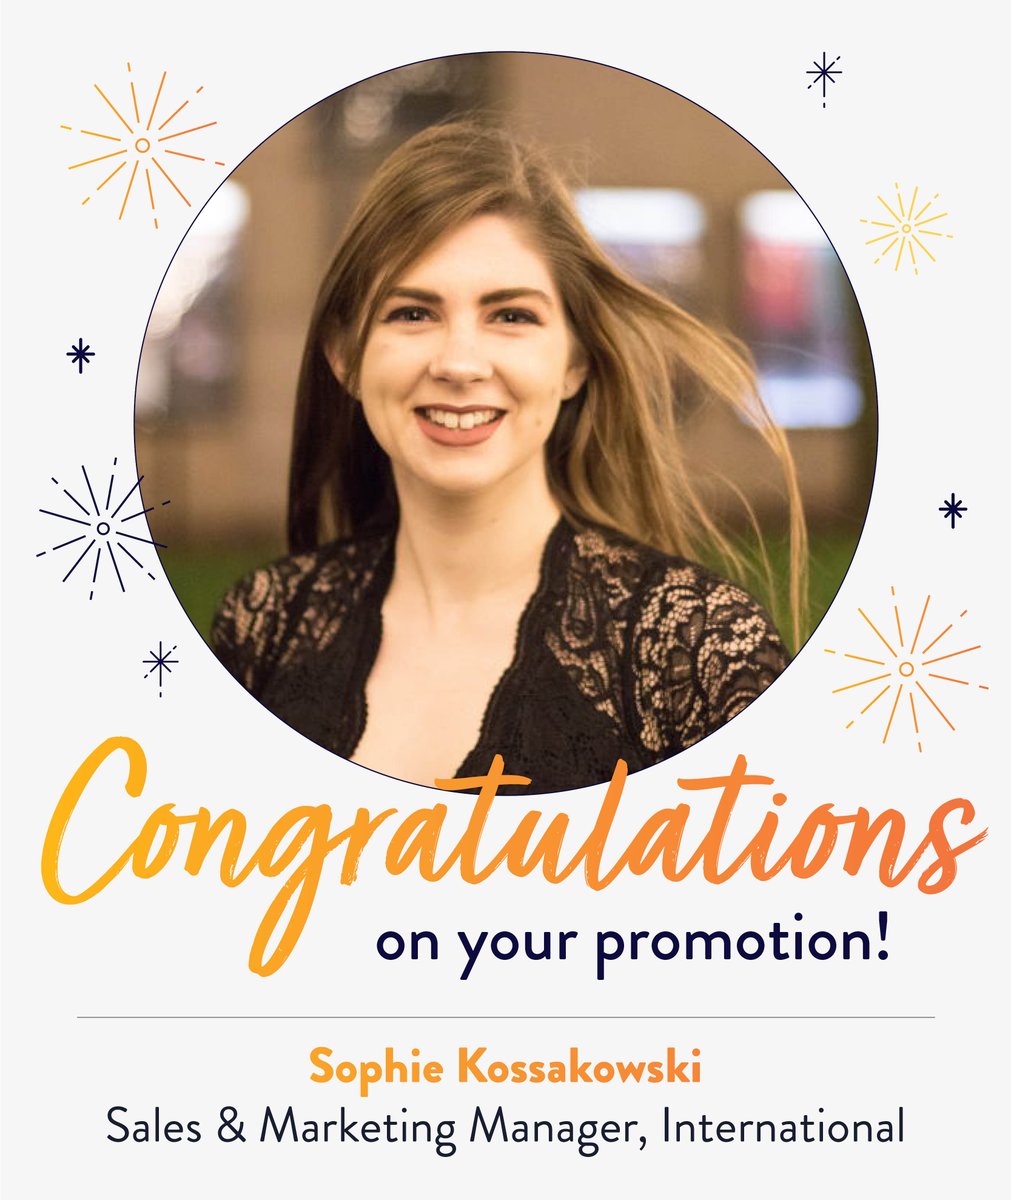 📢We're thrilled to share Sophie Kossakowski's promotion to Sales & Marketing Manager! 📚 Sophie is a vital member of the international sales team. In this new role she'll take on more responsibility & continue her great work across all international markets. Congratulations!